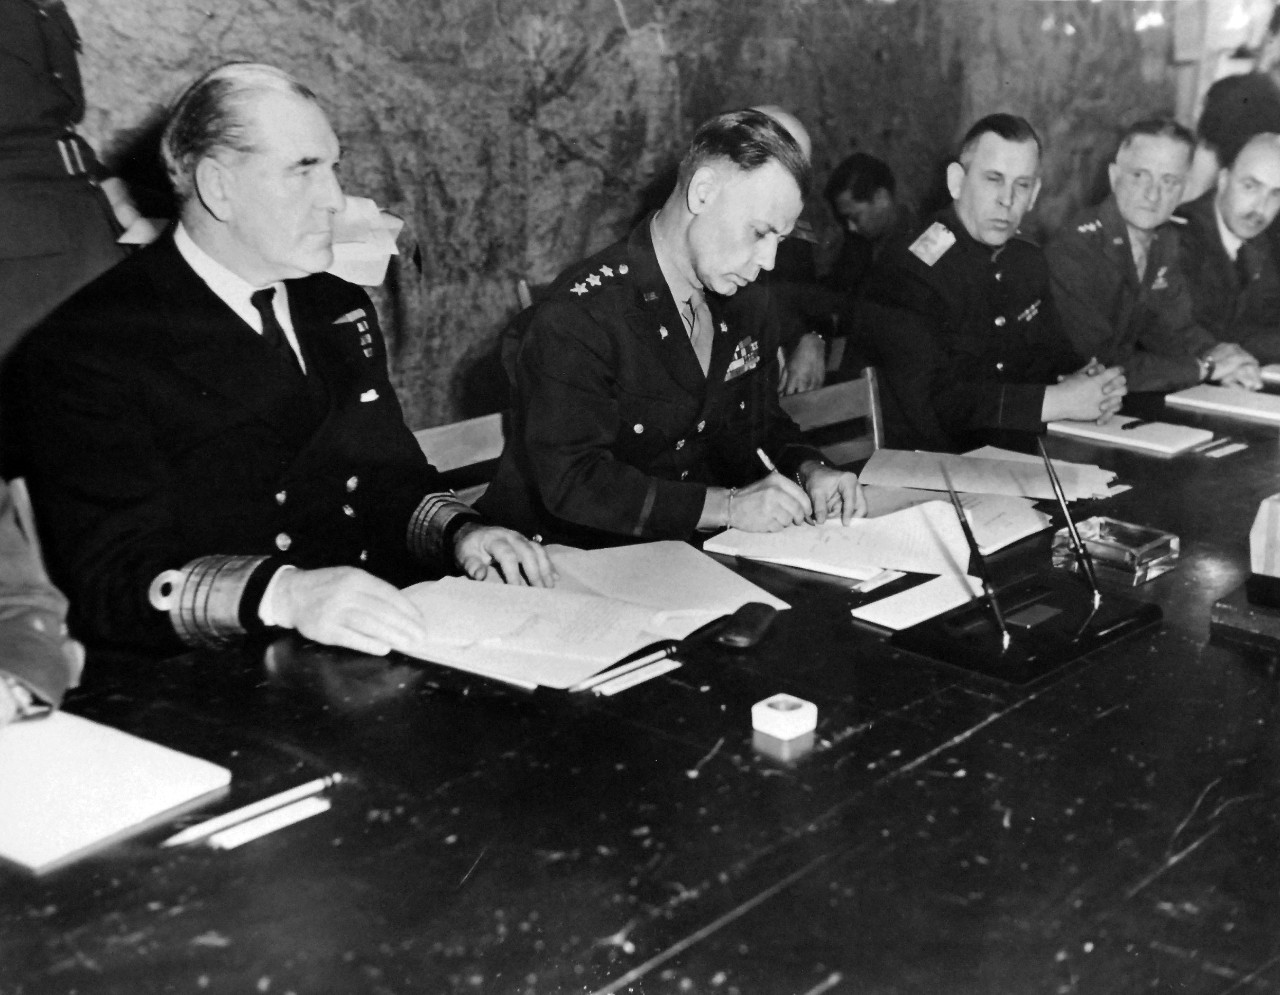 111-SC-27262: Lieutenant General W.B. Smith, Chief of Staff, SHAEF, affixes his signature to the Unconditional Surrender document on behalf of the Allied High Command after it had been signed by the representatives of the German government sitting across the table from him at SHAEF, Reims, France.  On General Smith’s right is Admiral Harold M. Burrough, Commander in Chief, Allied Naval Expeditionary Forces.  On General Smith’s left is Major General Ivan Alexeyevich Susloparov of the Russian Artillery and General Carl A. Spaatz, CG, US Staff.  U.S. Army Photograph.  Courtesy of the Library of Congress Collection, Lot-8988. (2015/10/16).